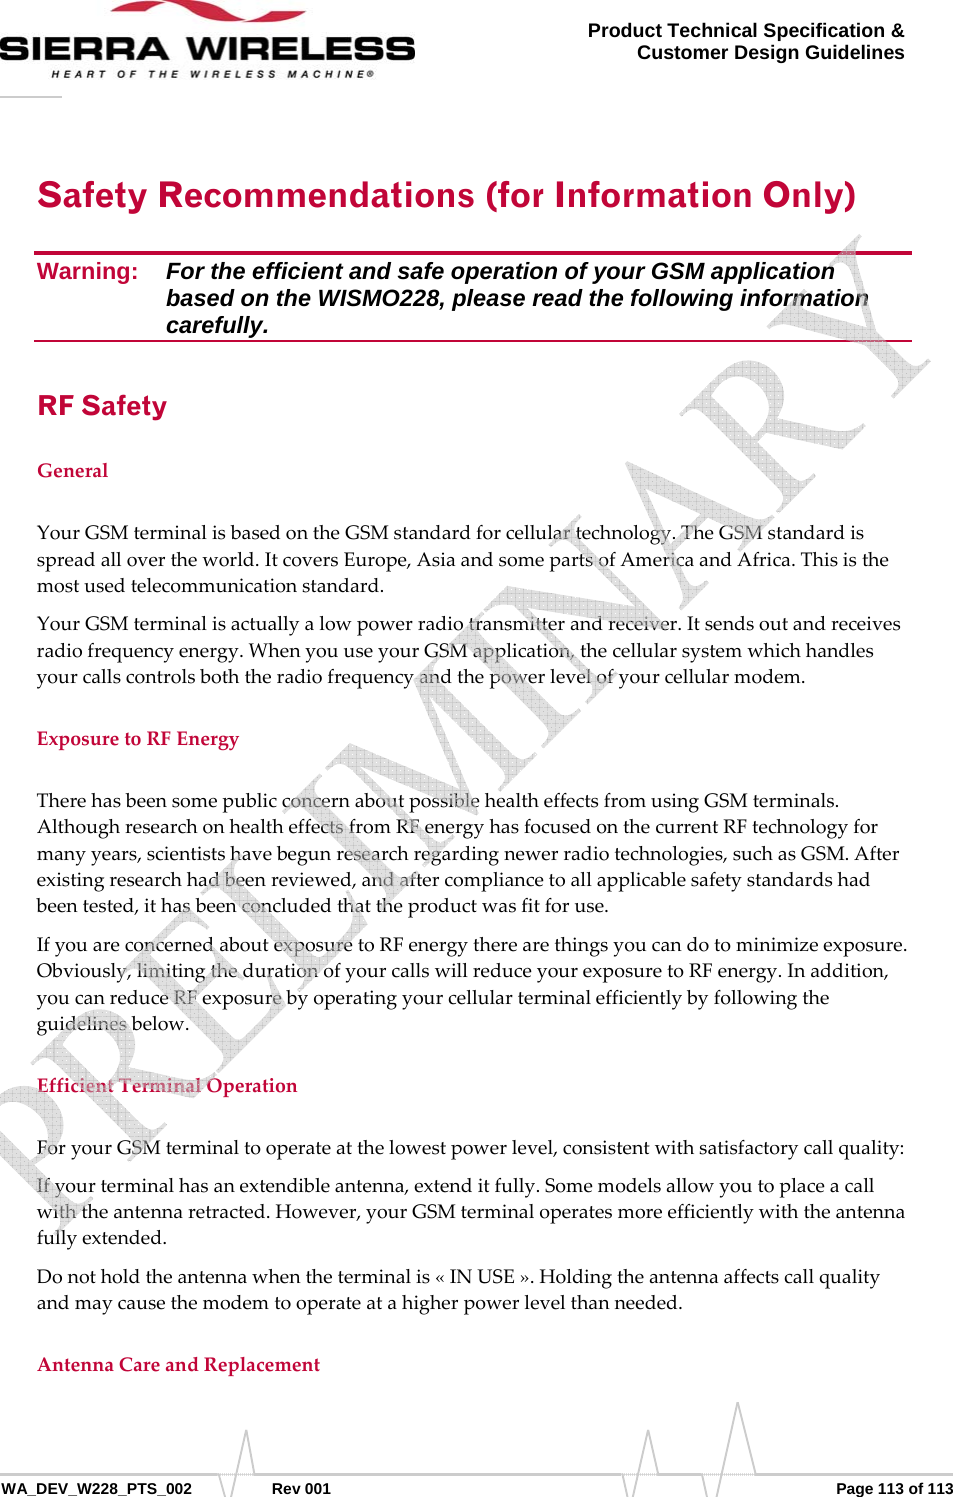      WA_DEV_W228_PTS_002 Rev 001  Page 113 of 113 Product Technical Specification &amp; Customer Design Guidelines Safety Recommendations (for Information Only) Warning:   For the efficient and safe operation of your GSM application based on the WISMO228, please read the following information carefully. RF Safety GeneralYourGSMterminalisbasedontheGSMstandardforcellulartechnology.TheGSMstandardisspreadallovertheworld.ItcoversEurope,AsiaandsomepartsofAmericaandAfrica.Thisisthemostusedtelecommunicationstandard.YourGSMterminalisactuallyalowpowerradiotransmitterandreceiver.Itsendsoutandreceivesradiofrequencyenergy.WhenyouuseyourGSMapplication,thecellularsystemwhichhandlesyourcallscontrolsboththeradiofrequencyandthepowerlevelofyourcellularmodem.ExposuretoRFEnergyTherehasbeensomepublicconcernaboutpossiblehealtheffectsfromusingGSMterminals.AlthoughresearchonhealtheffectsfromRFenergyhasfocusedonthecurrentRFtechnologyformanyyears,scientistshavebegunresearchregardingnewerradiotechnologies,suchasGSM.Afterexistingresearchhadbeenreviewed,andaftercompliancetoallapplicablesafetystandardshadbeentested,ithasbeenconcludedthattheproductwasfitforuse.IfyouareconcernedaboutexposuretoRFenergytherearethingsyoucandotominimizeexposure.Obviously,limitingthedurationofyourcallswillreduceyourexposuretoRFenergy.Inaddition,youcanreduceRFexposurebyoperatingyourcellularterminalefficientlybyfollowingtheguidelinesbelow.EfficientTerminalOperationForyourGSMterminaltooperateatthelowestpowerlevel,consistentwithsatisfactorycallquality:Ifyourterminalhasanextendibleantenna,extenditfully.Somemodelsallowyoutoplaceacallwiththeantennaretracted.However,yourGSMterminaloperatesmoreefficientlywiththeantennafullyextended.Donotholdtheantennawhentheterminalis«INUSE».Holdingtheantennaaffectscallqualityandmaycausethemodemtooperateatahigherpowerlevelthanneeded.AntennaCareandReplacement   